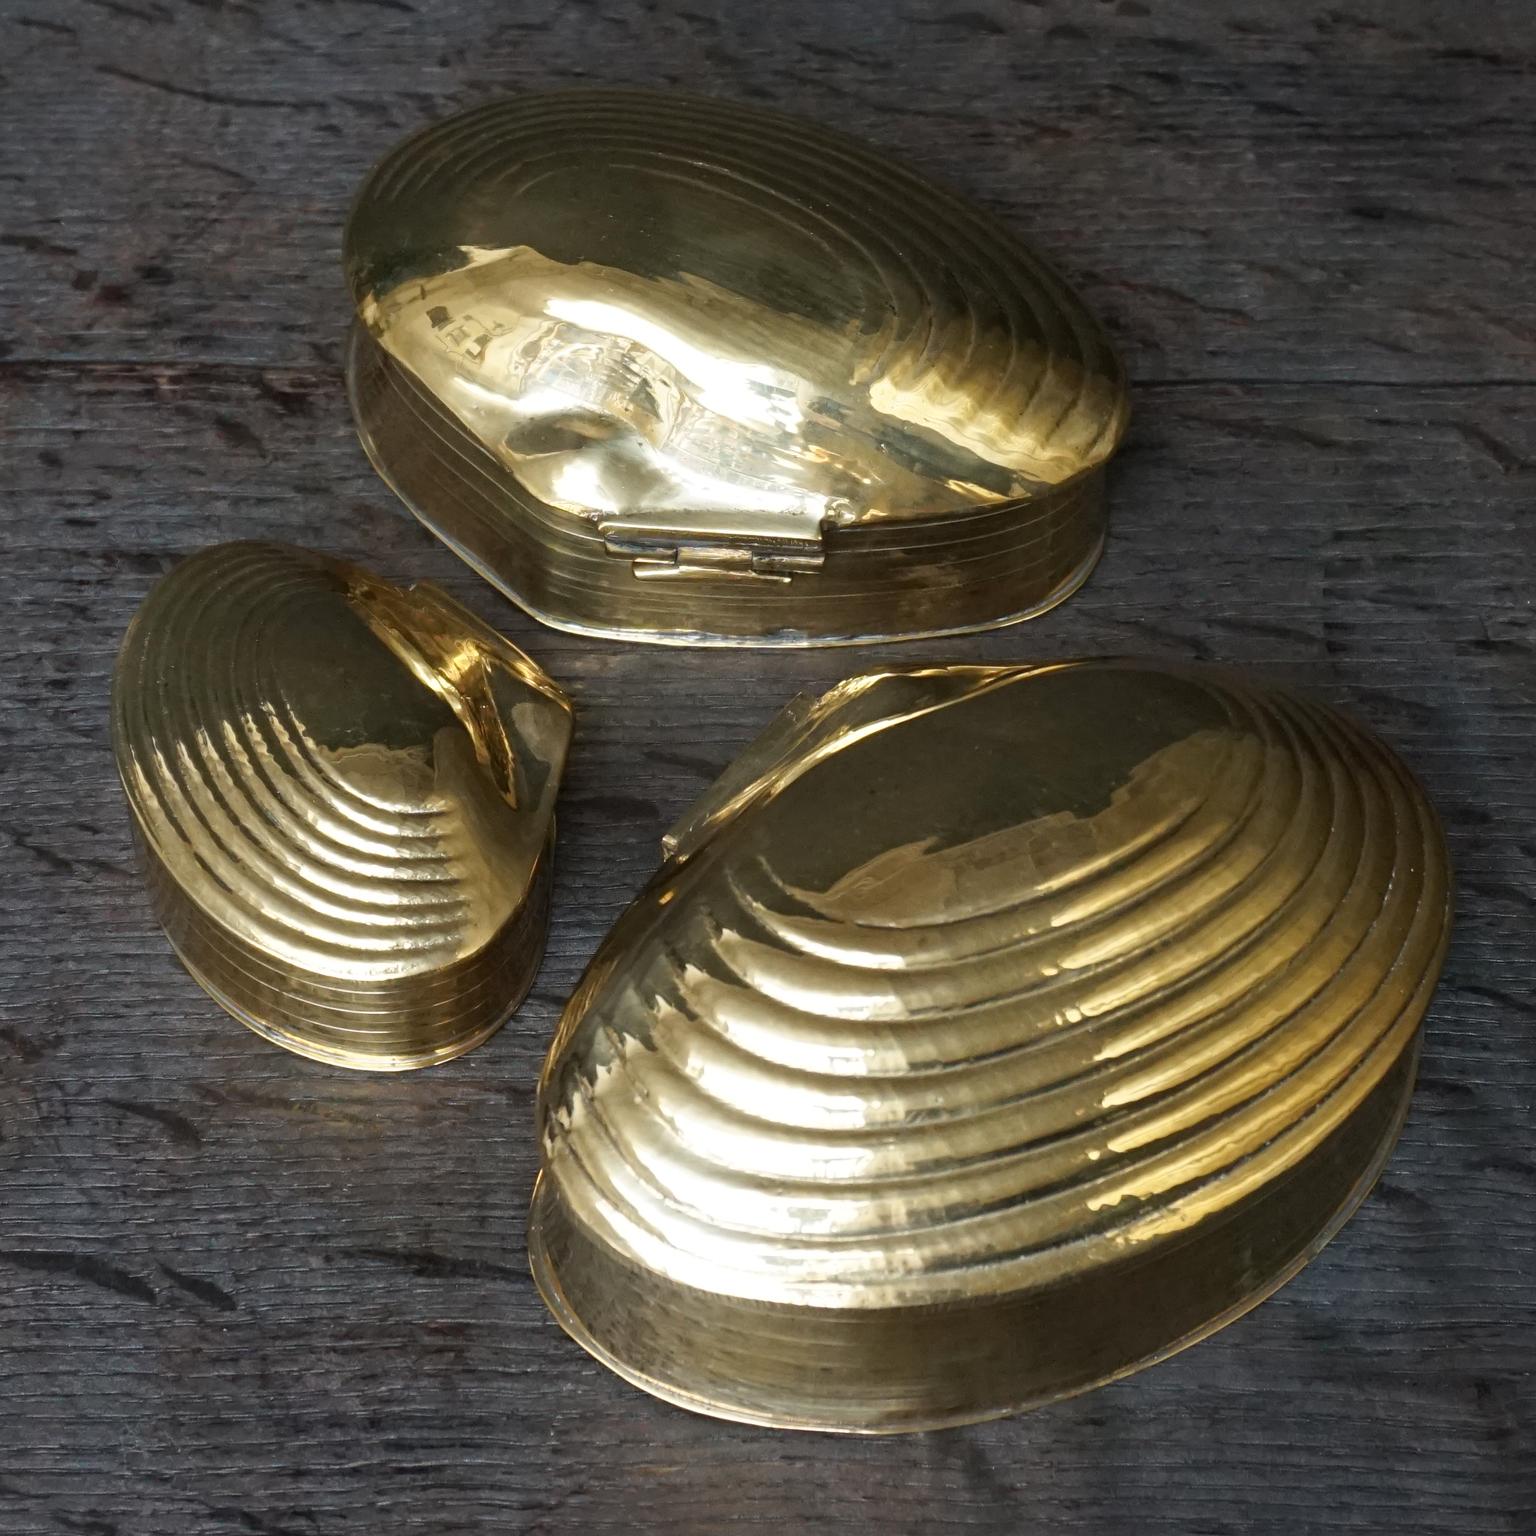 These heavy vintage brass clam shell trinket boxes would make a great gift.
The two smaller ones fit in the largest, like a nesting set.
All boxes have hinged lids.
    